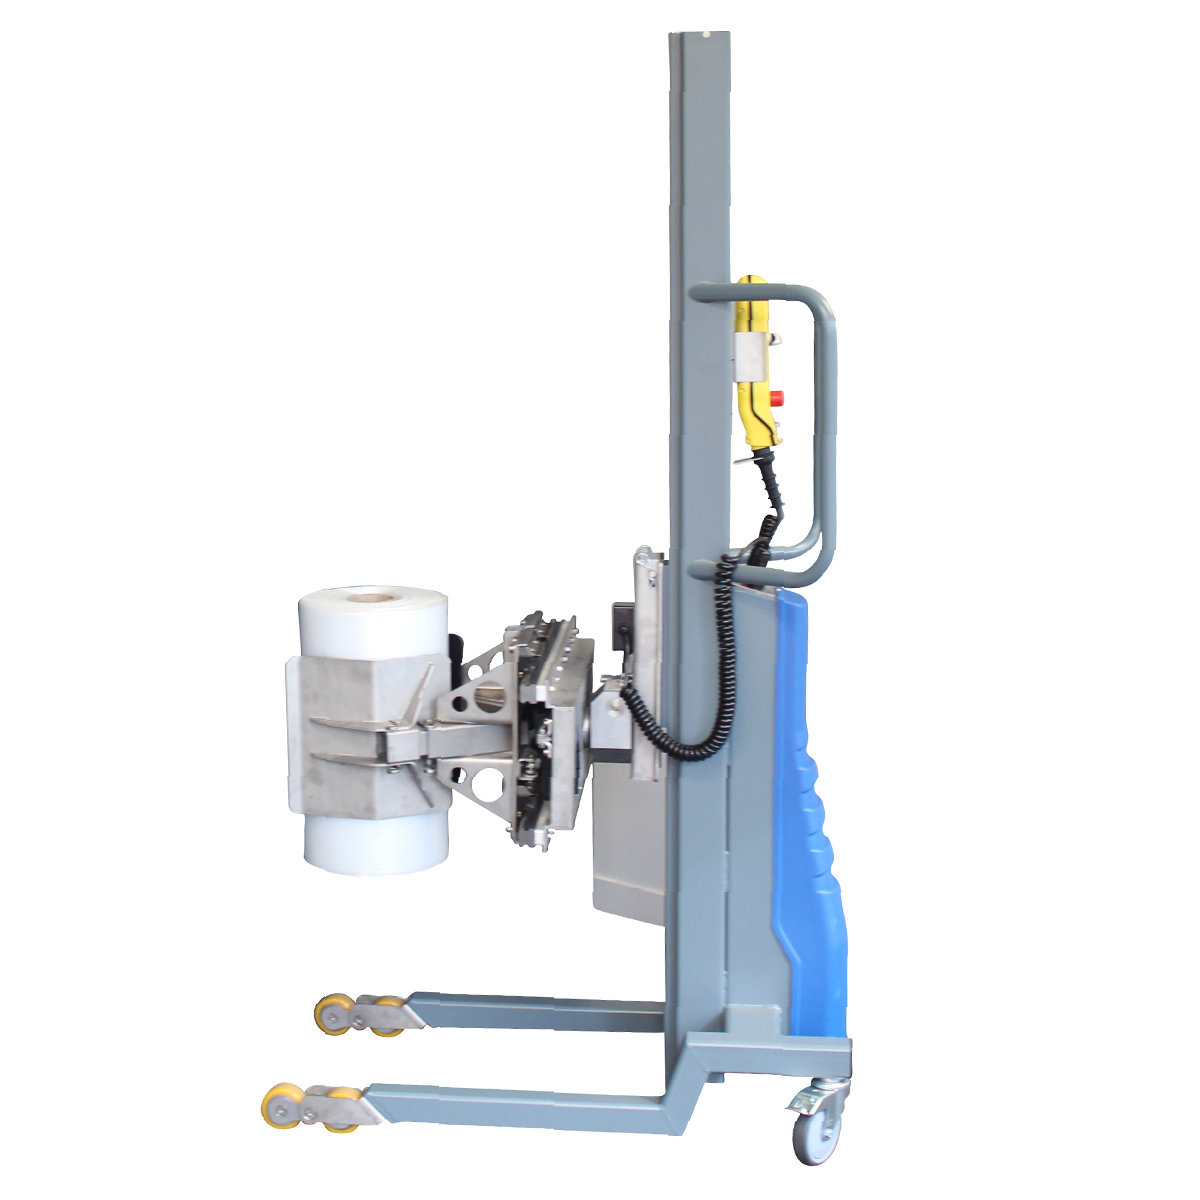 Buy Electric Clamp Roll Lifter in Roll Lifters from Astrolift NZ